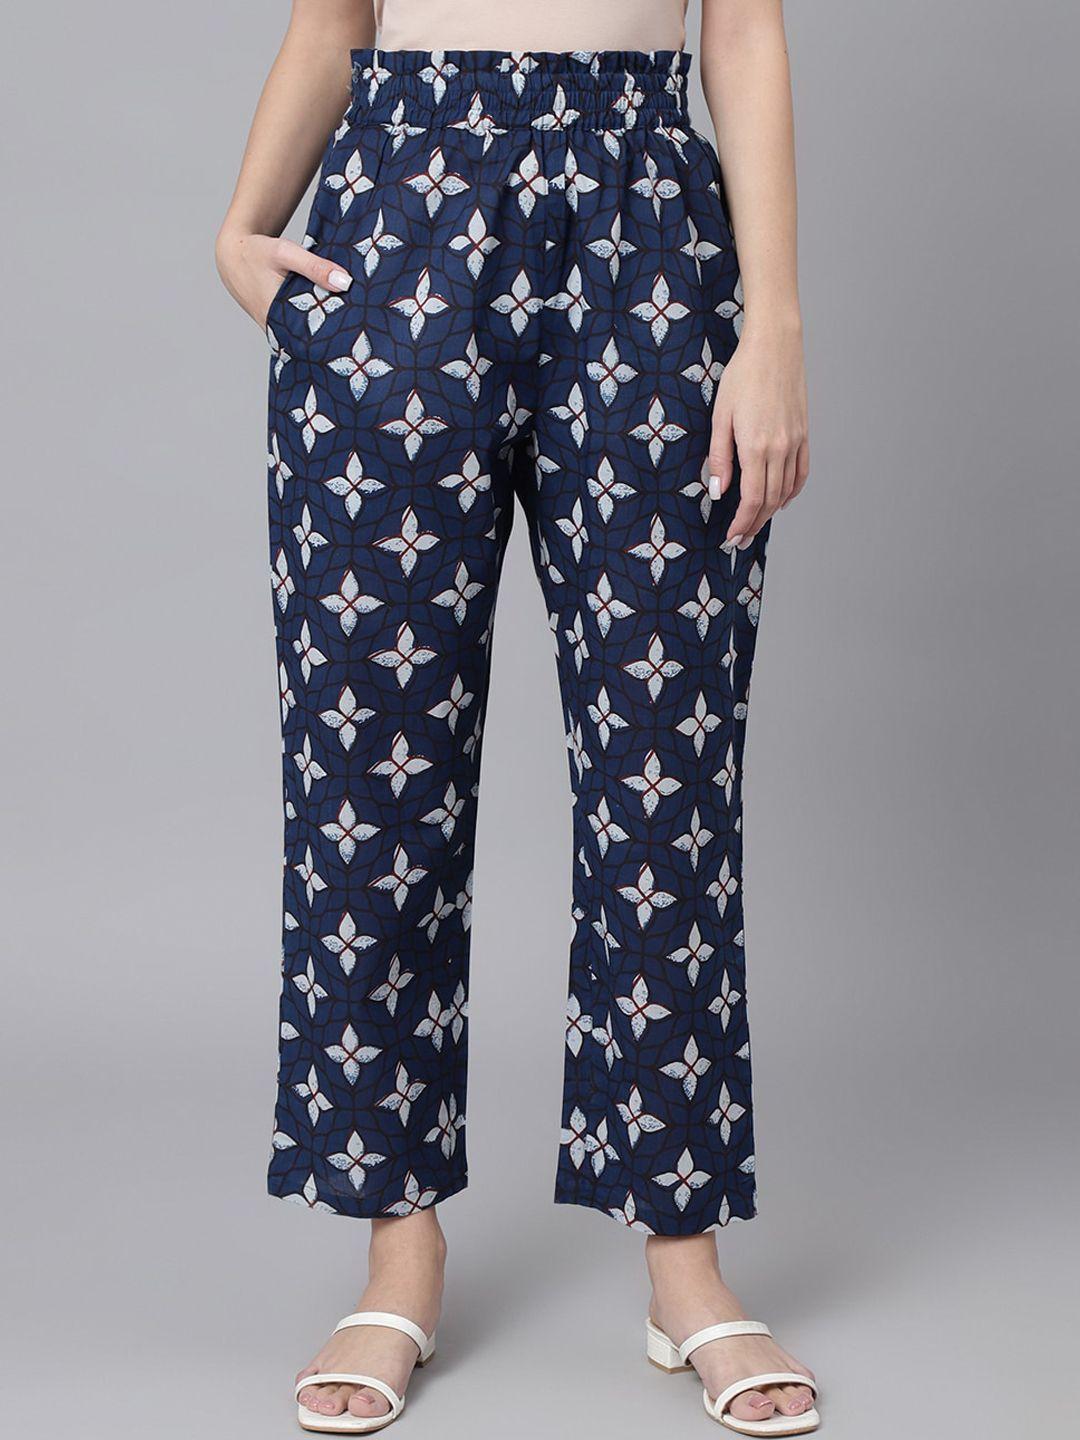 deckedup-women-floral-printed-relaxed-easy-wash-cotton-trousers